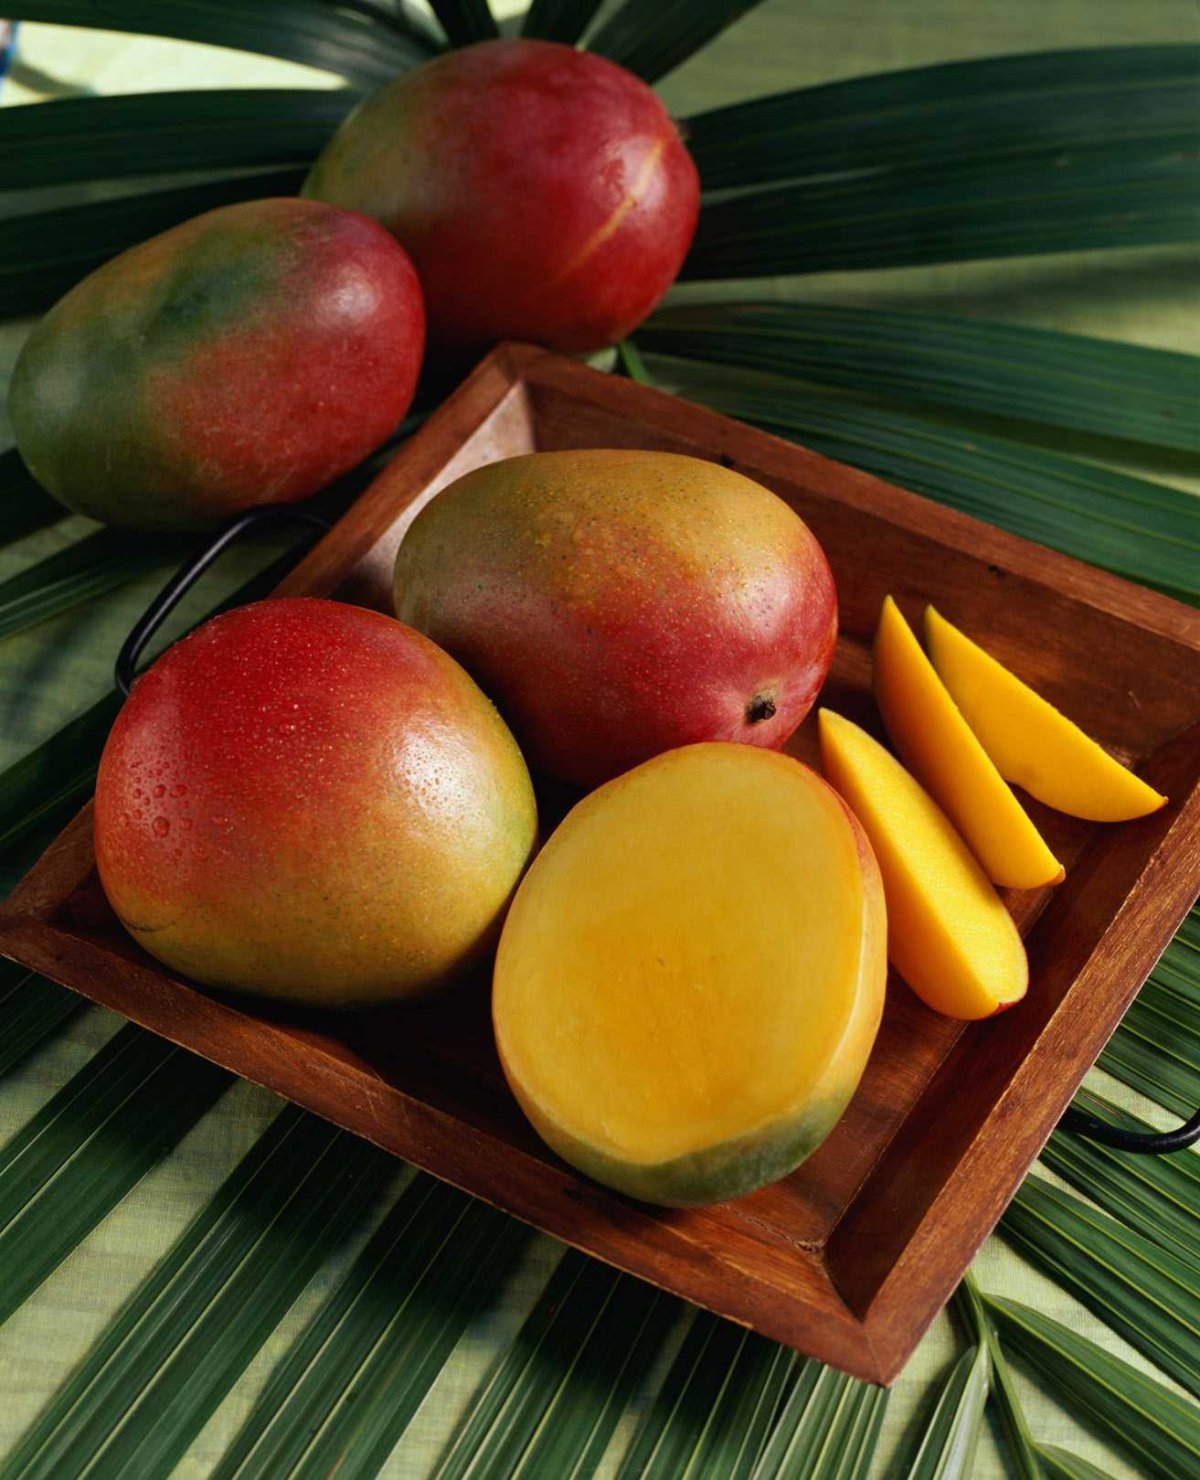 Organic Mango: Tropical Delight Without the Pesticide Residue Risk